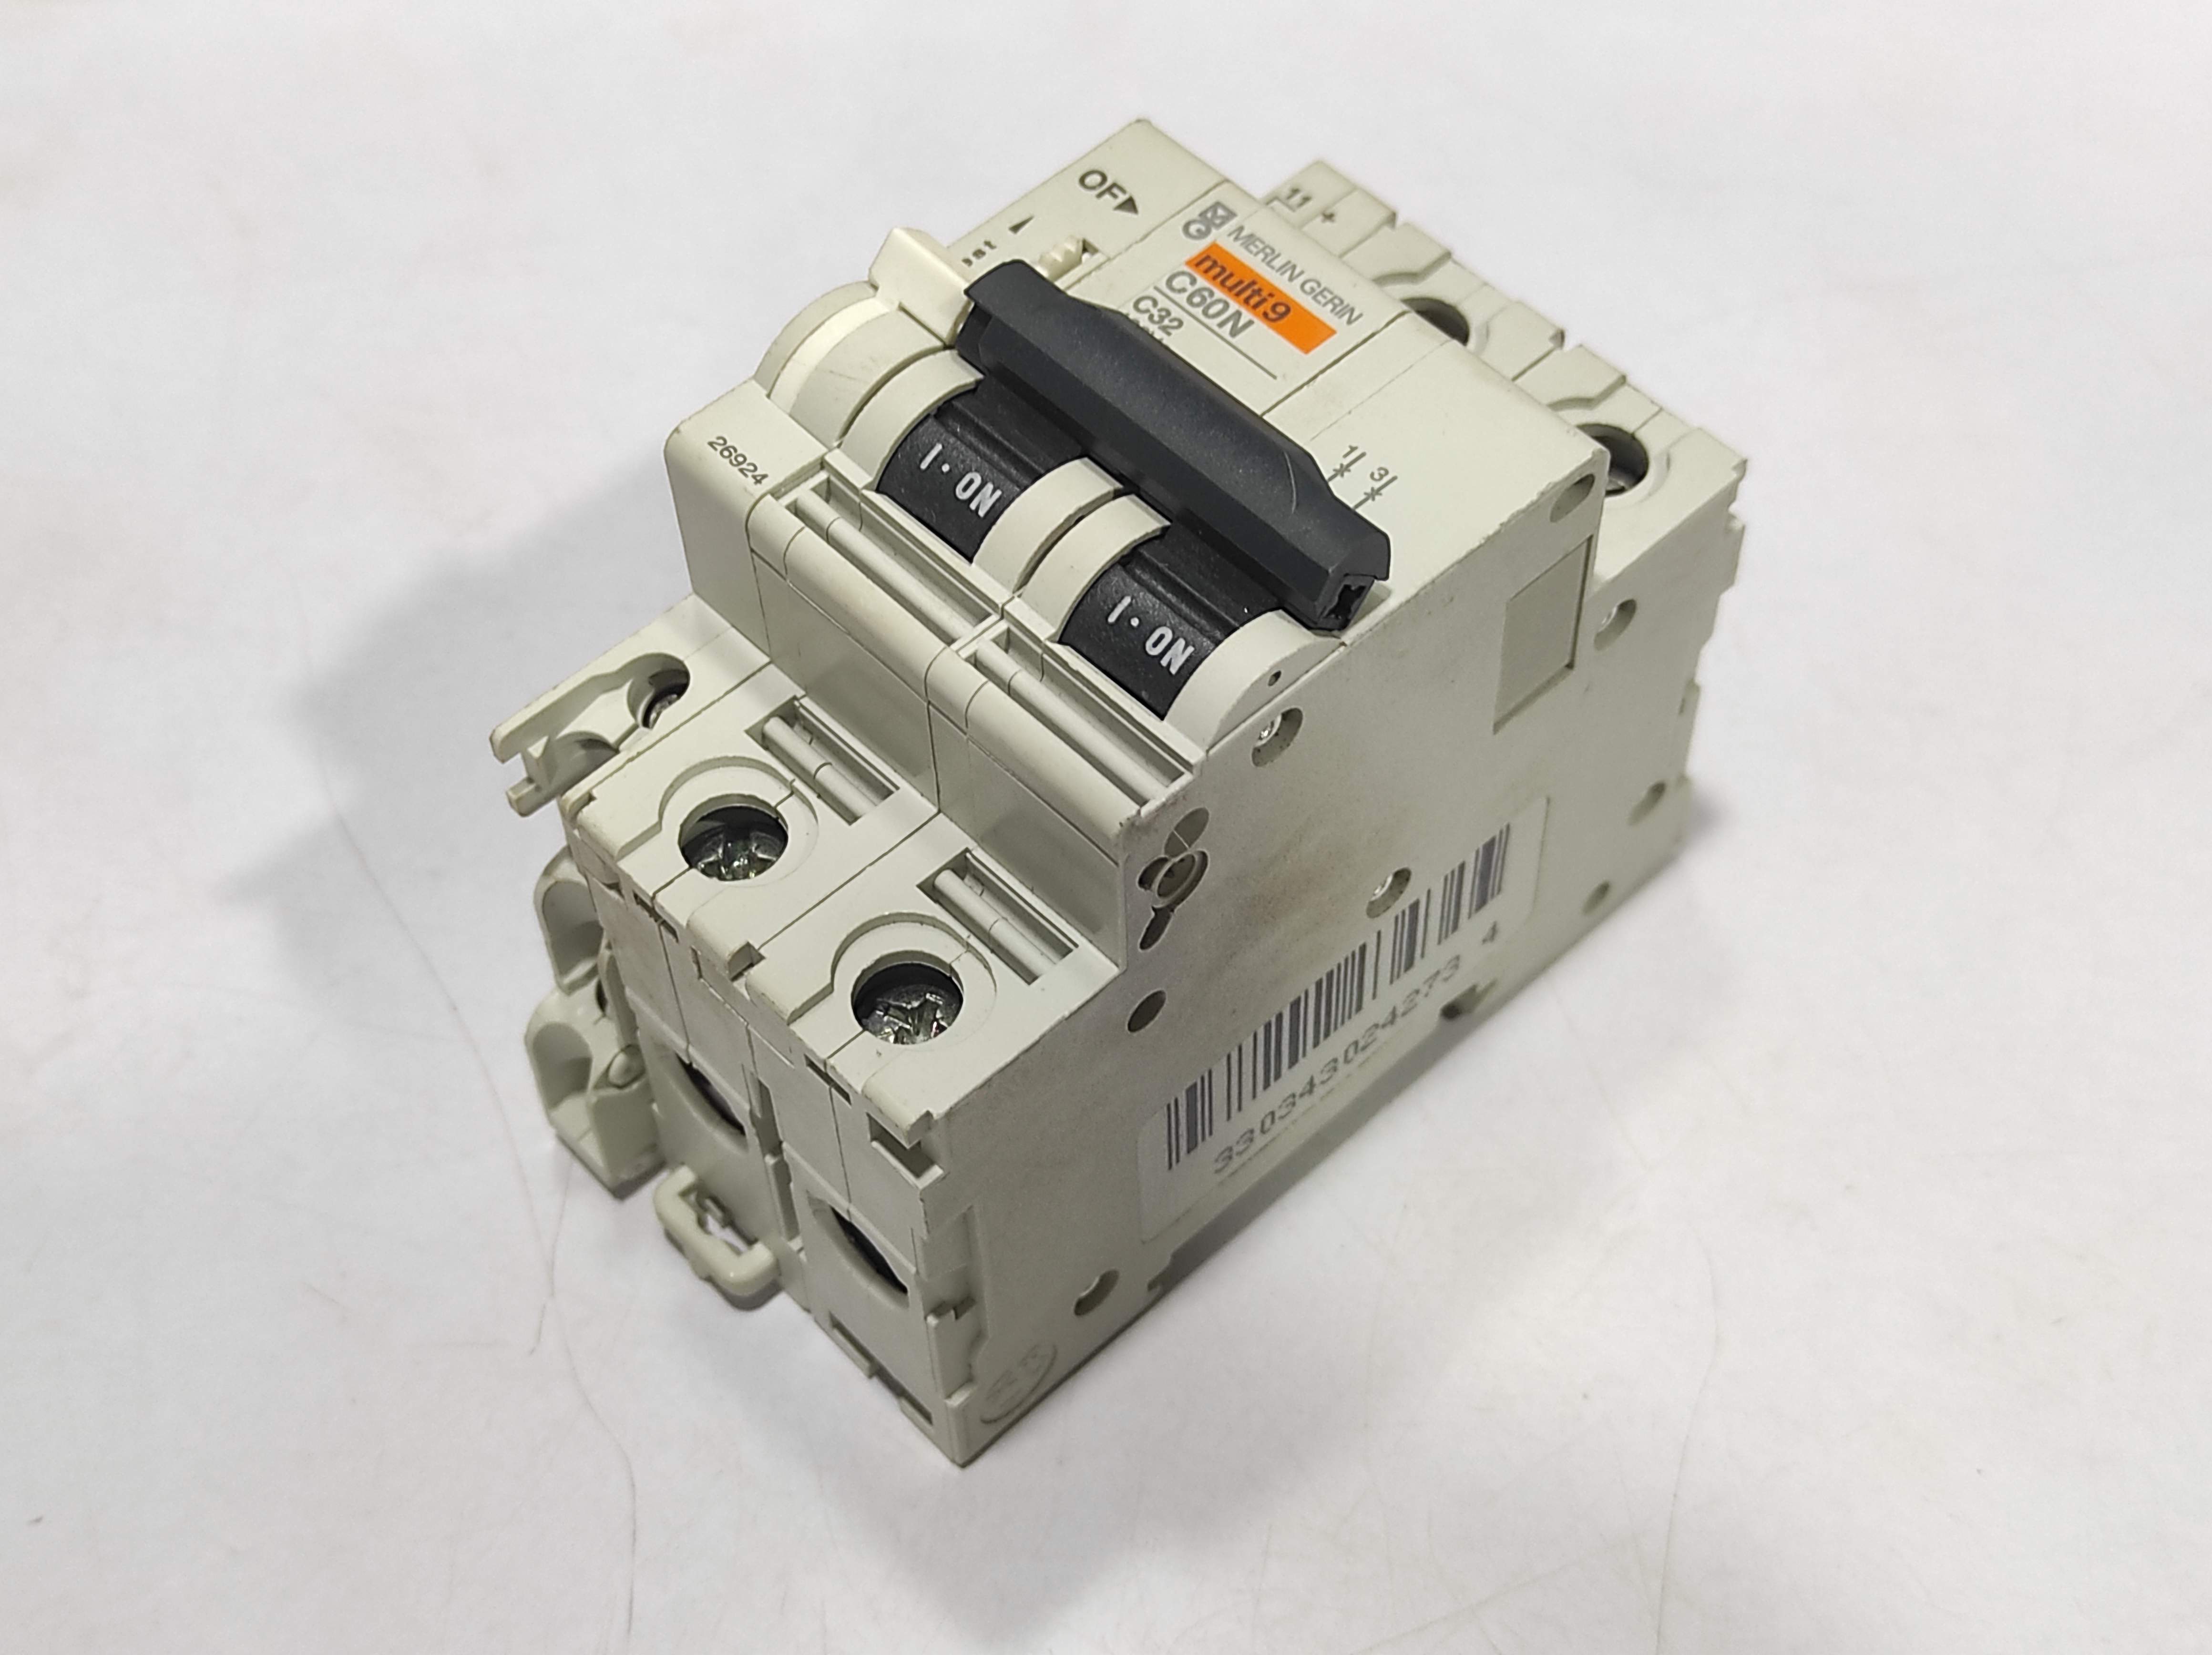 Merlin Gerin Multi 9 C60N C32 Circuit Breaker With Schneider 26924 Auxiliary Contact Block